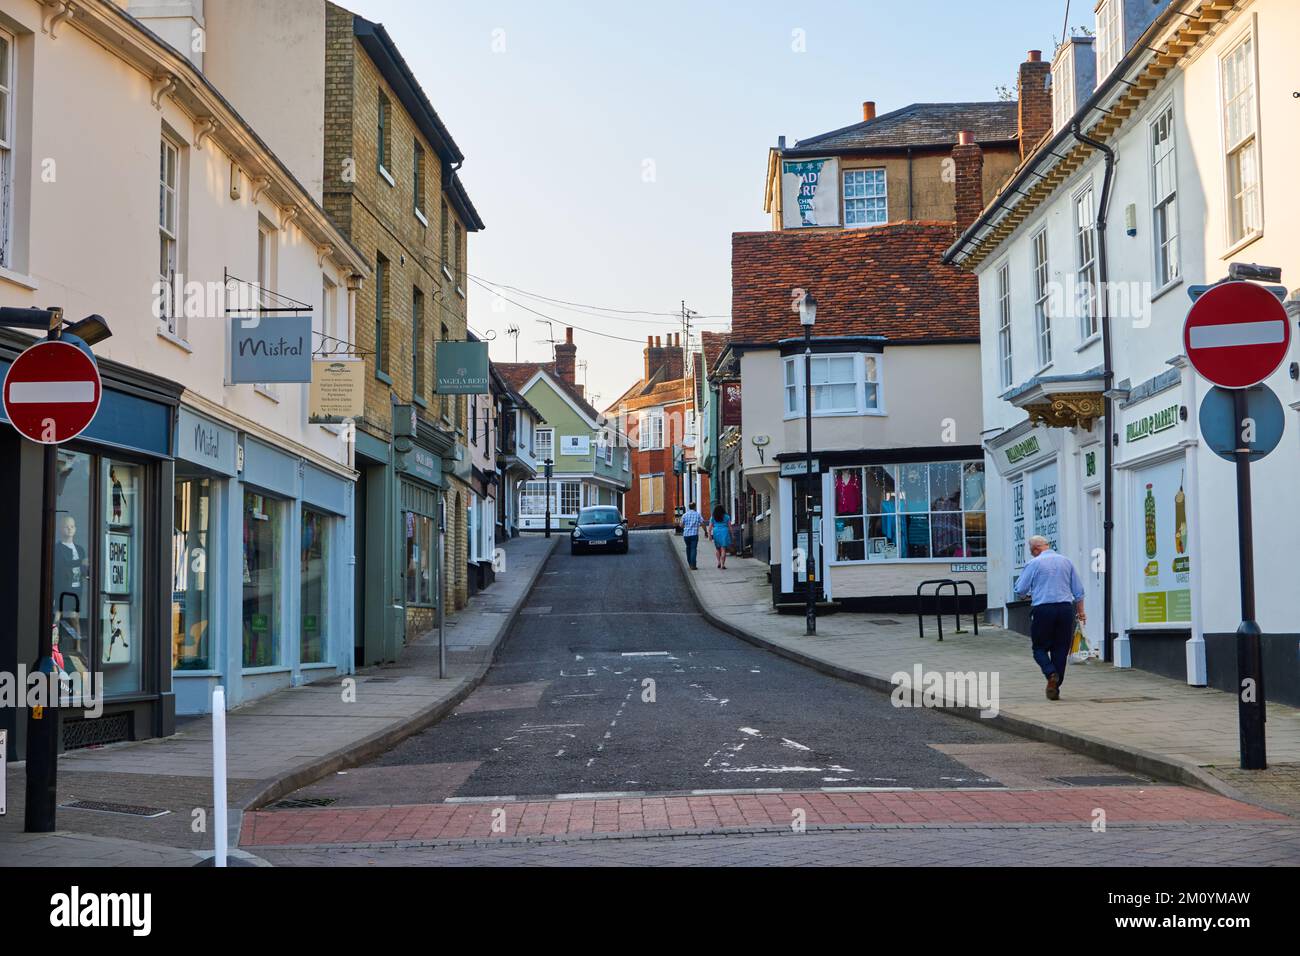 Side street with no entry signs and old shops in Saffron Walden, Essex, UK Stock Photo